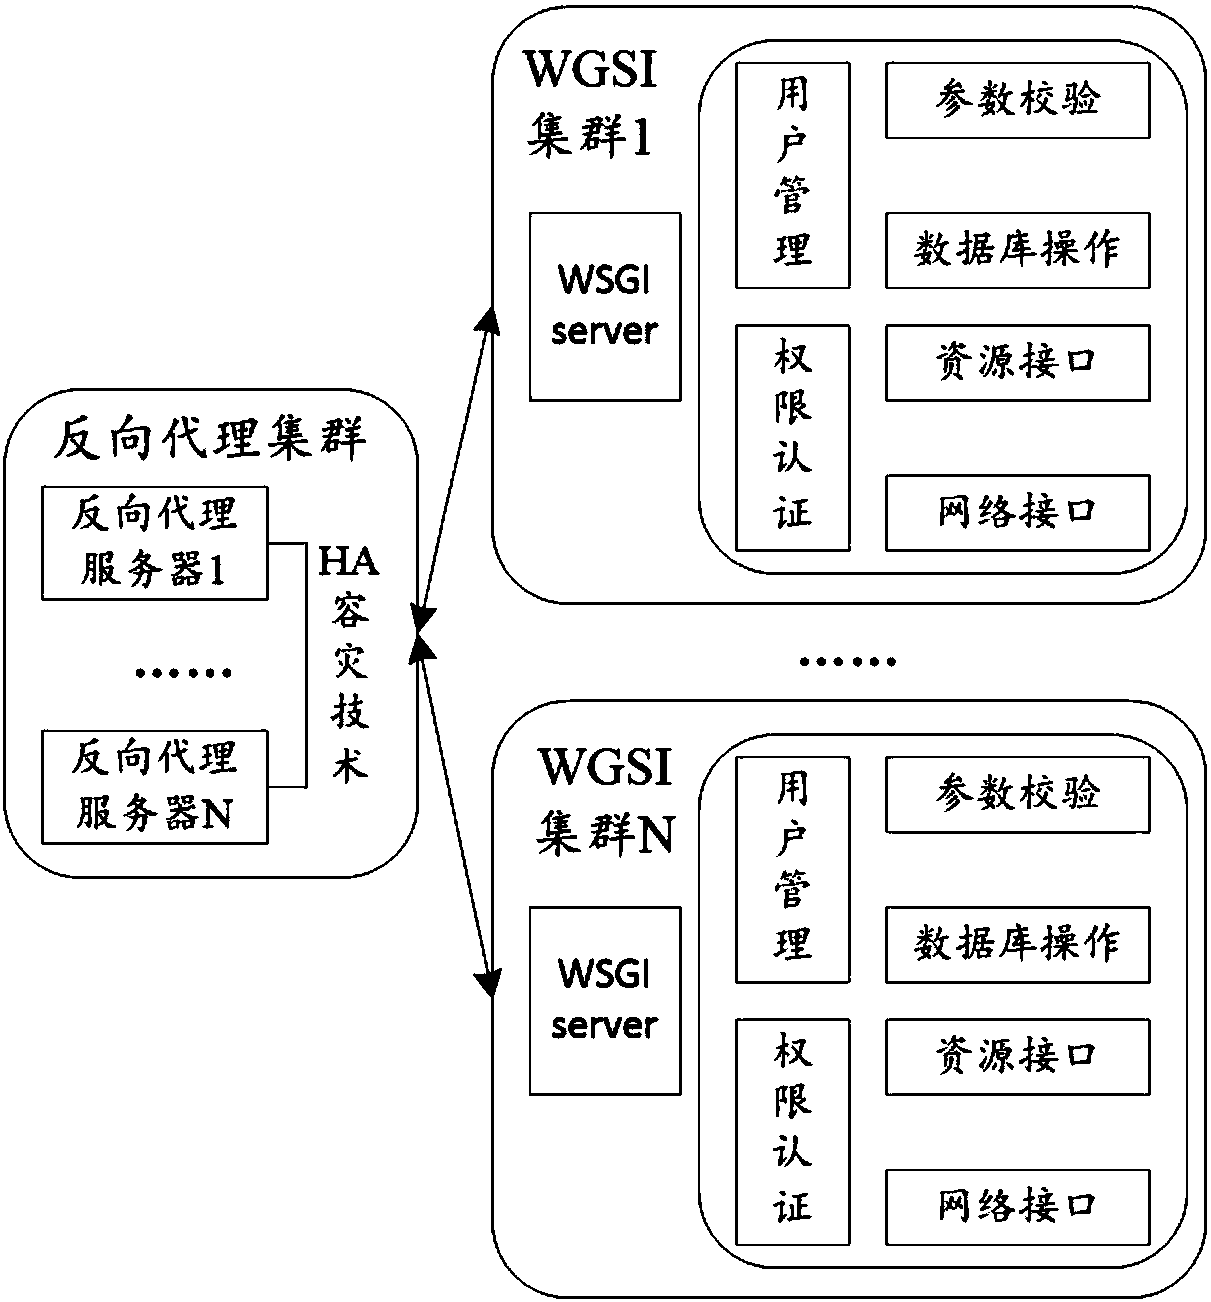 Virtual instance scheduling system and method based on cloud platform